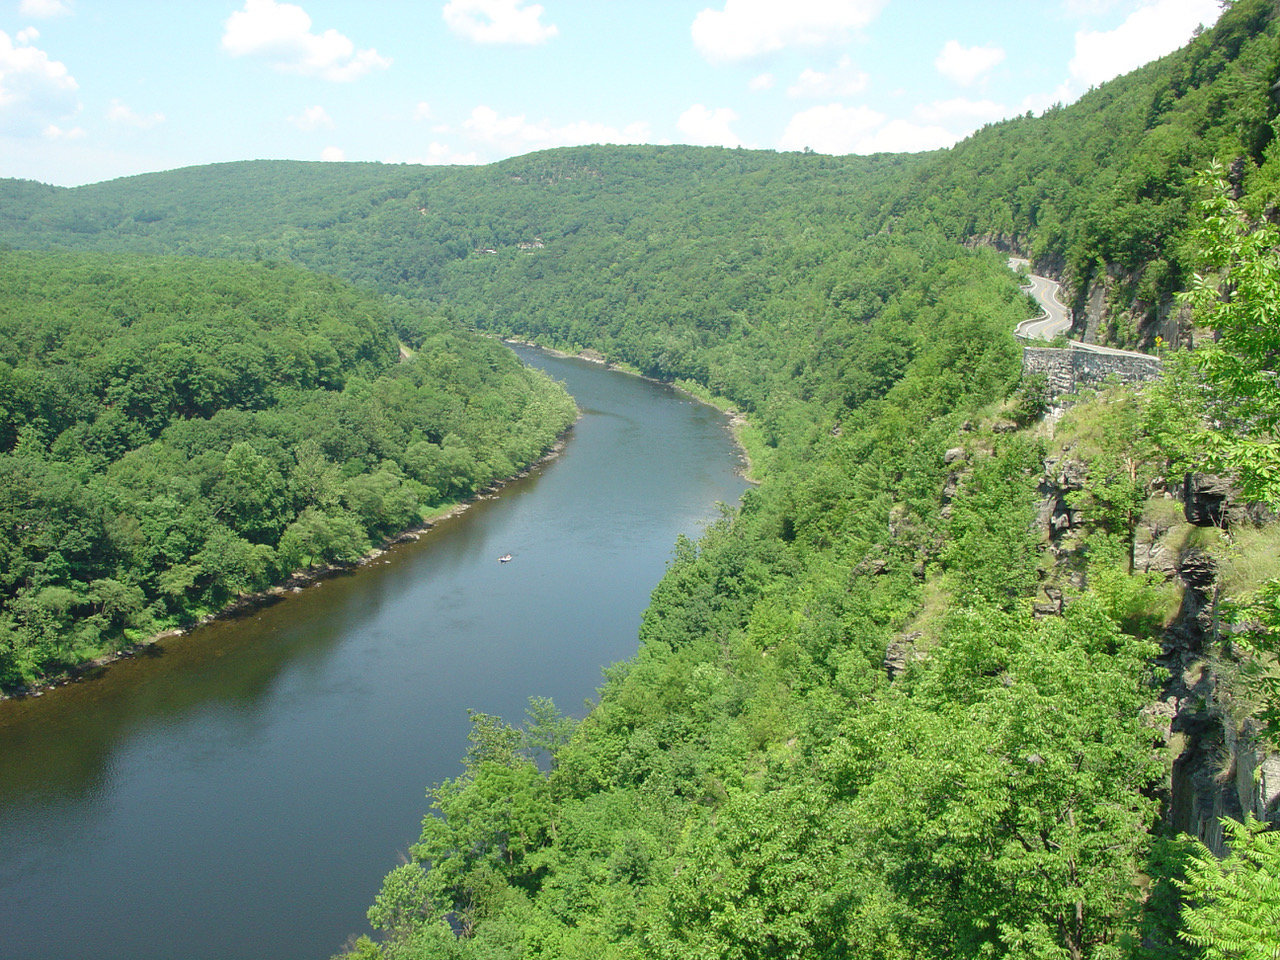 The Hawks Nest section of the New York State Route 97 Upper Delaware Scenic Byway in the Town of Deerpark offers a spectacular landscape.